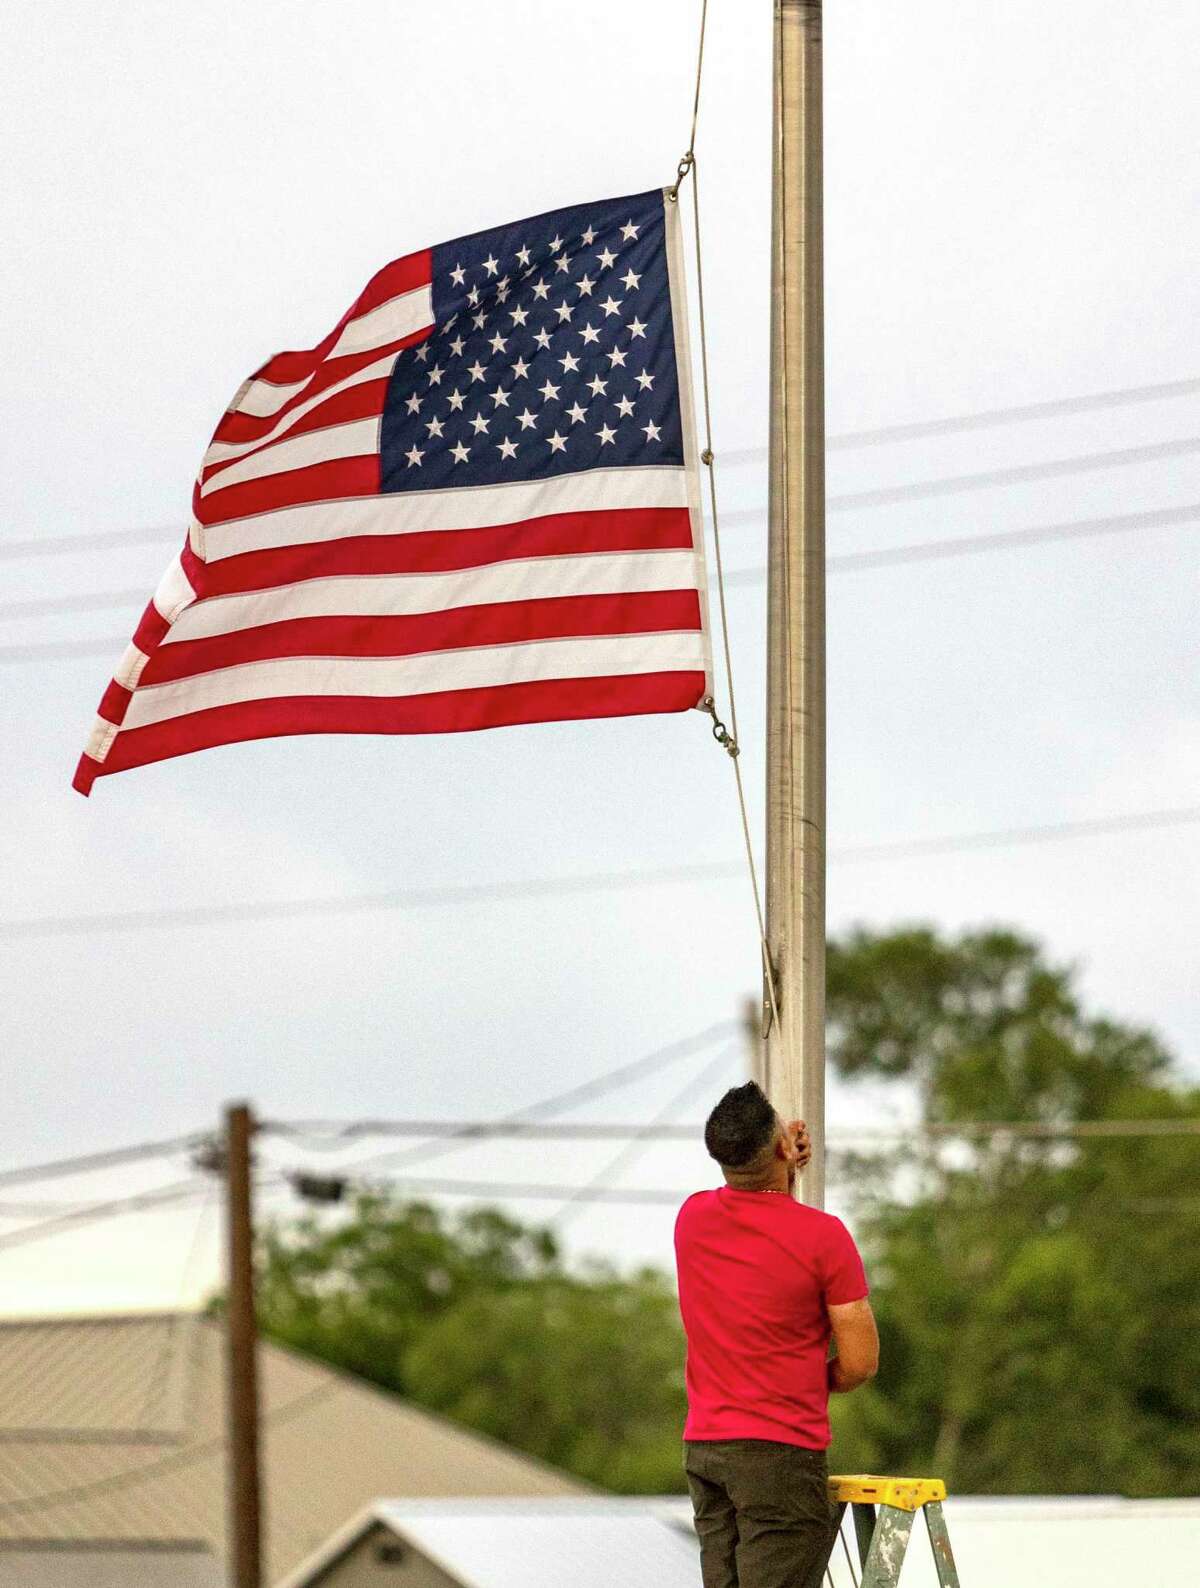 Readers express their sadness and horror about the shooting in Uvalde.